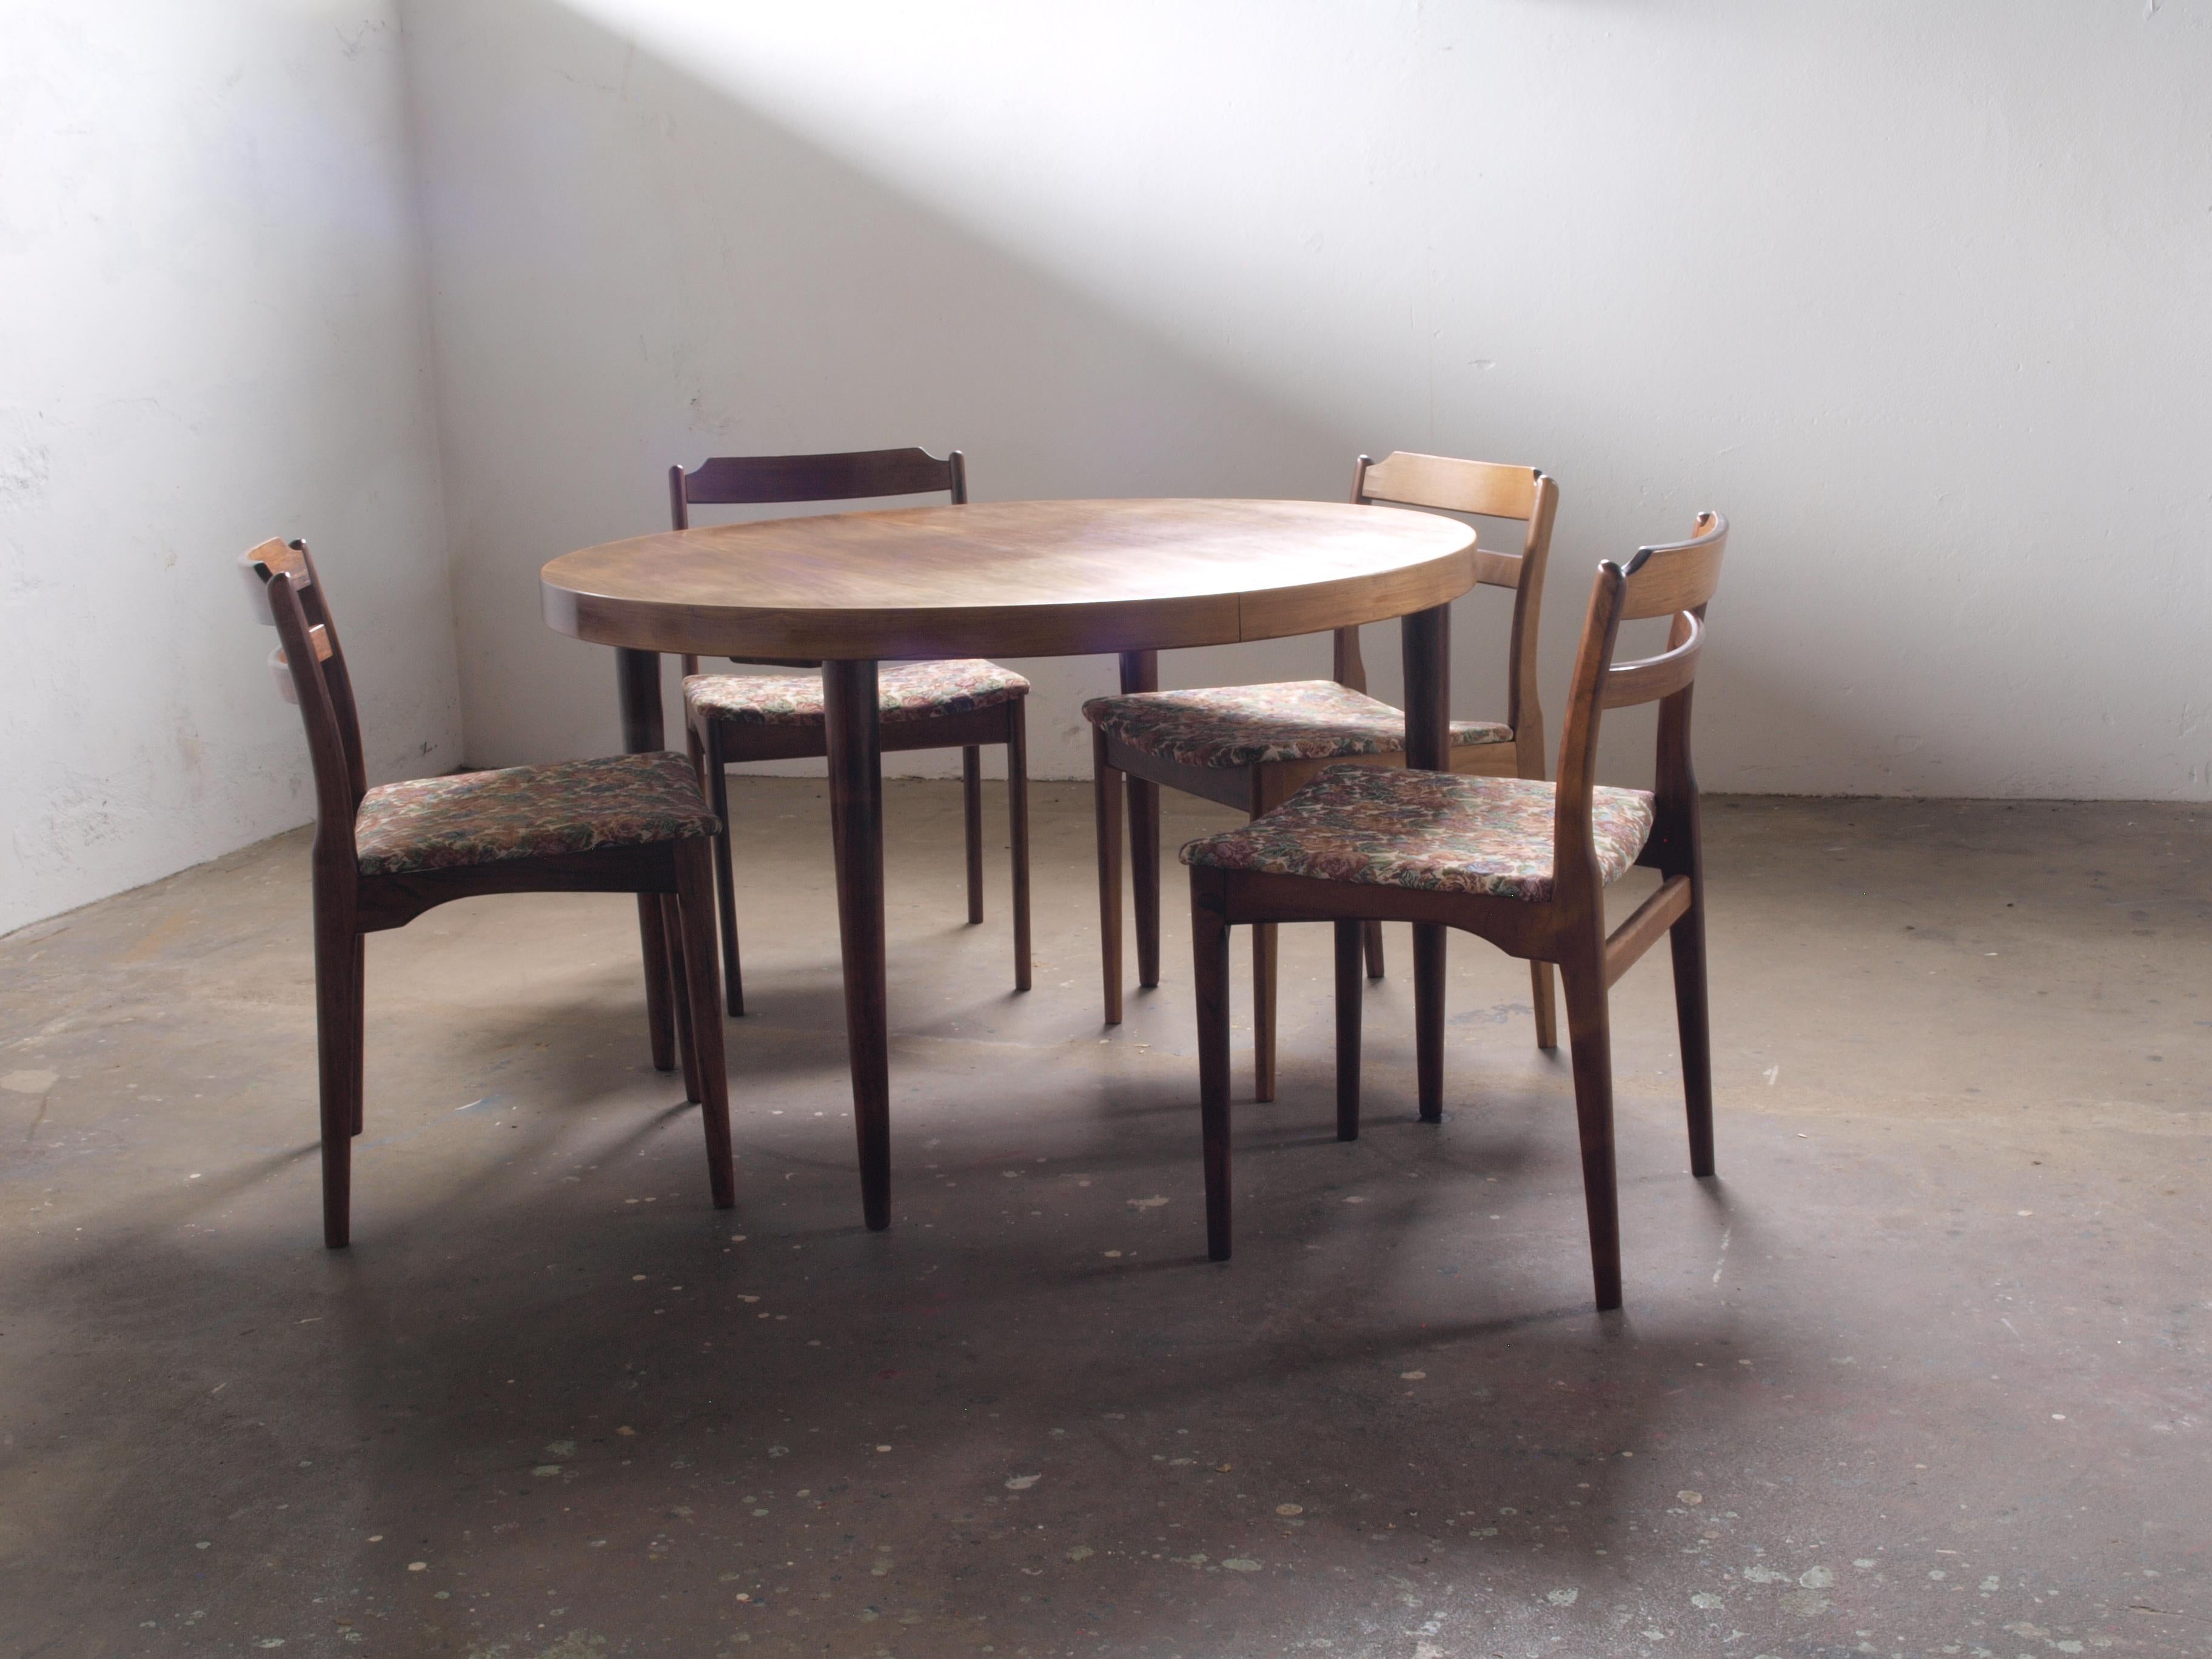 Well-crafted rosewood chairs from Thorsø Stole og Møbelfabrik, featuring beautiful floral upholstery. In excellent condition with no tears or odors. Sold as a set of 6, all from the same home and meticulously cared for by a single owner.

Each chair